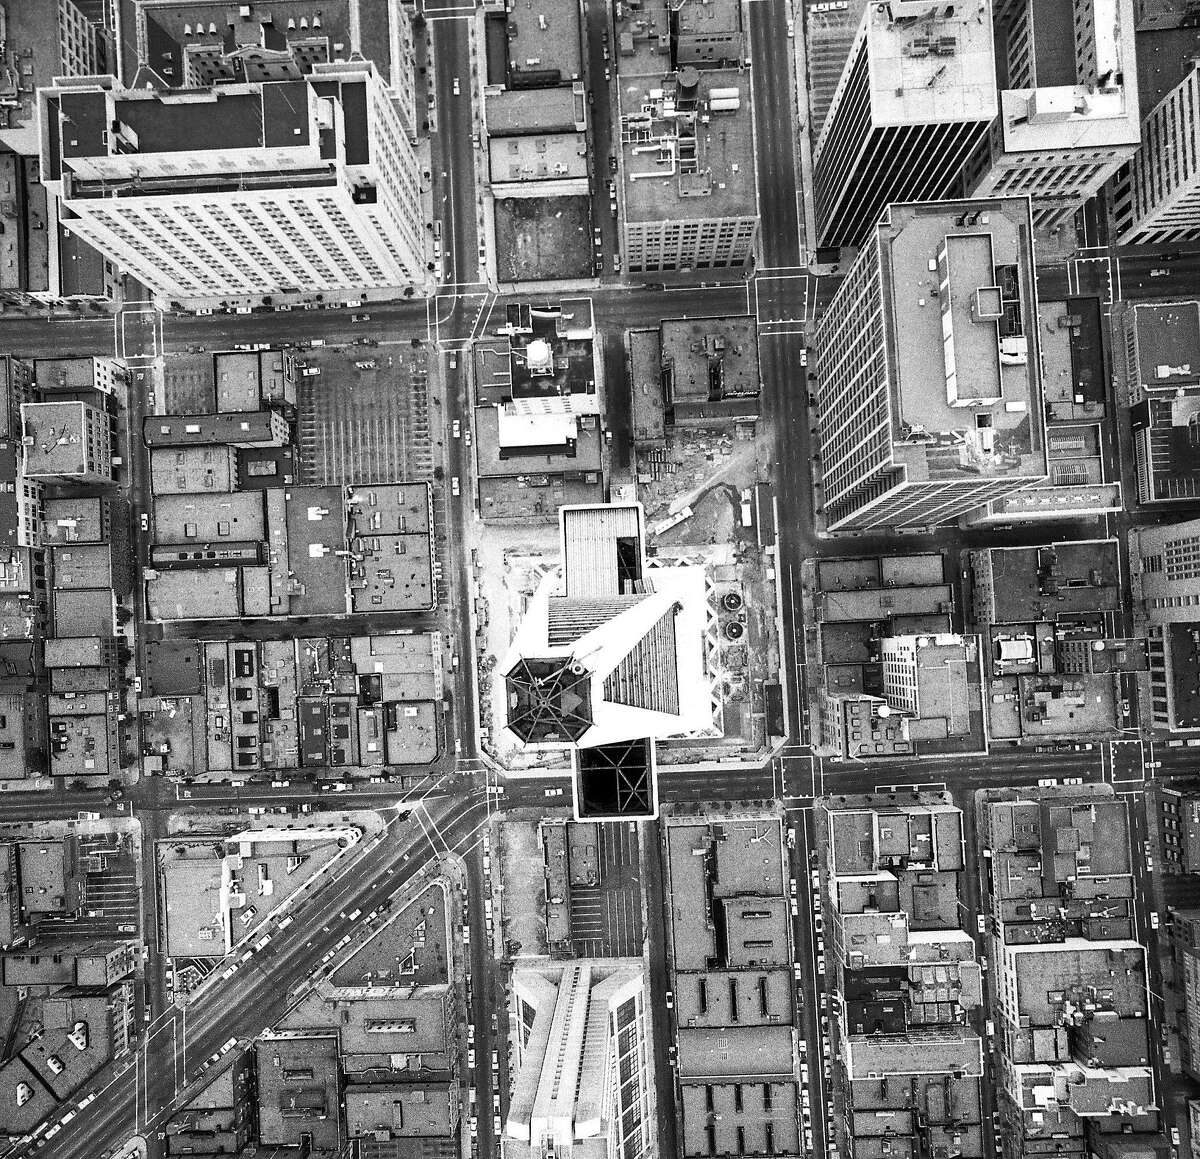 Aerial view of the Transamerica Pyramid Building taken from a helicopter about 150 feet above the building Photos shot 05/17/1972